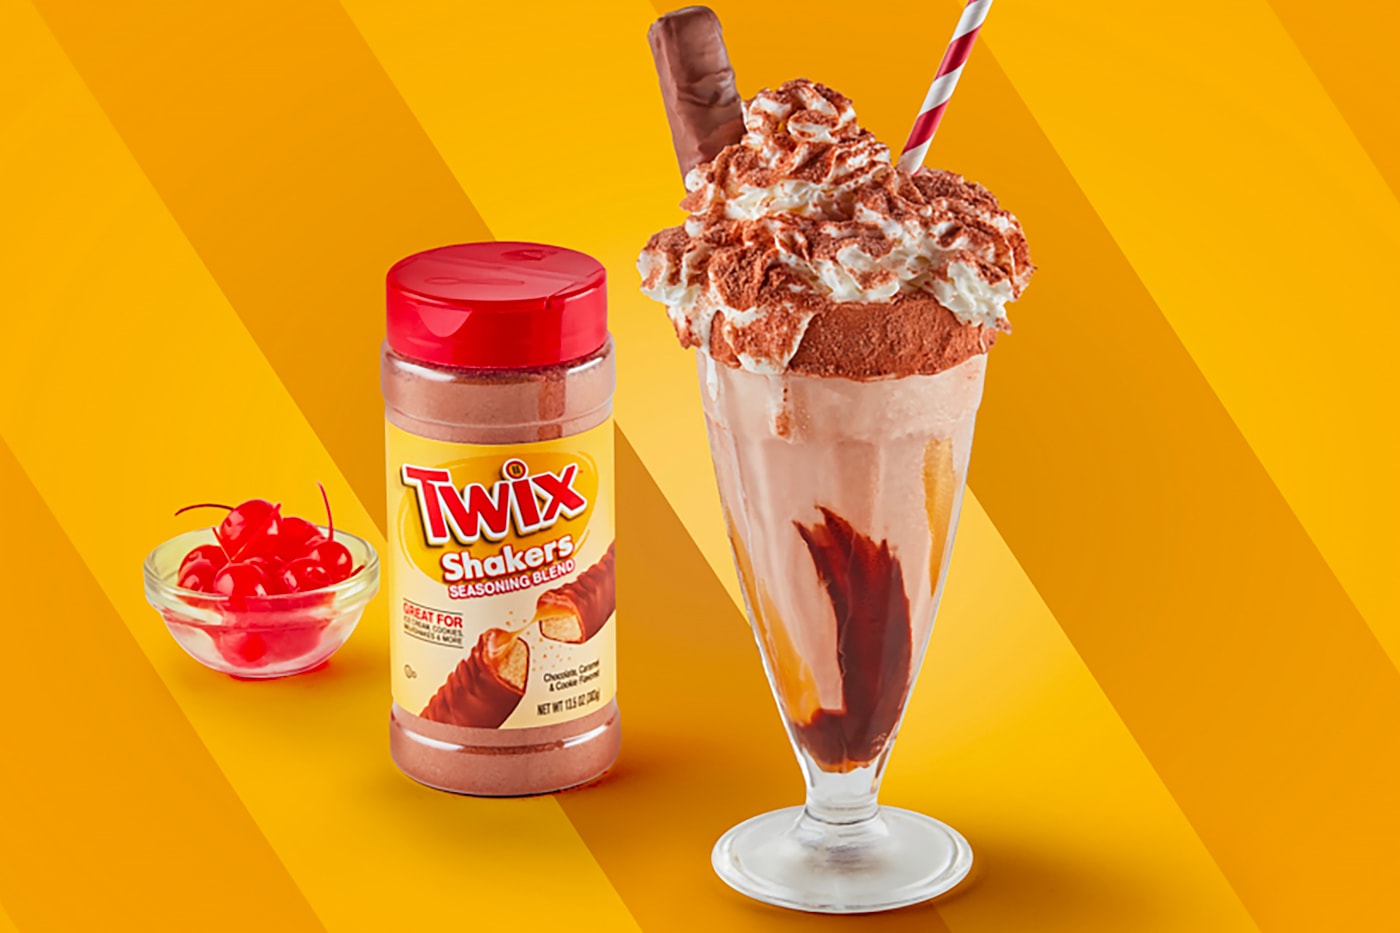 Twix Launches New Shakers Seasoning Blend